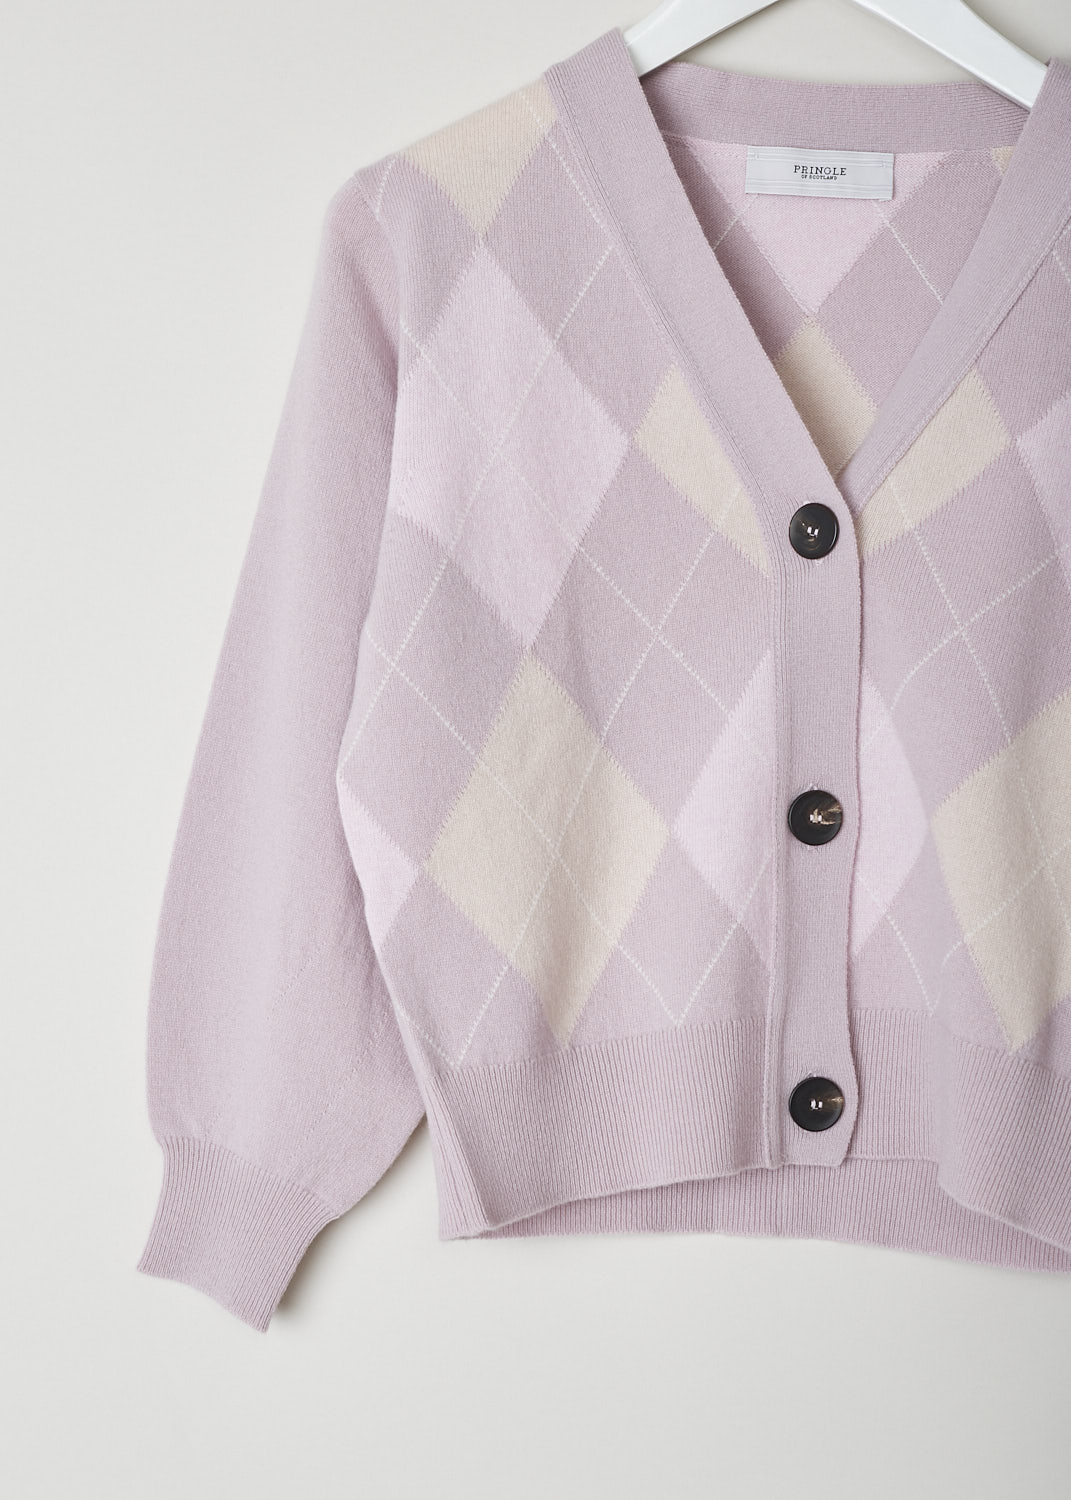 PRINGLE OF SCOTLAND, POWDER PINK ARGYLE CARDIGAN, PWB829_TZB2_POWDER_PIN, Pink, Print, Detail, This powder pink argyle cardigan has a V-shaped neckline and a front button closure. The cuffs and hemline have a ribbed finish. The cardigan has a cropped length. 
